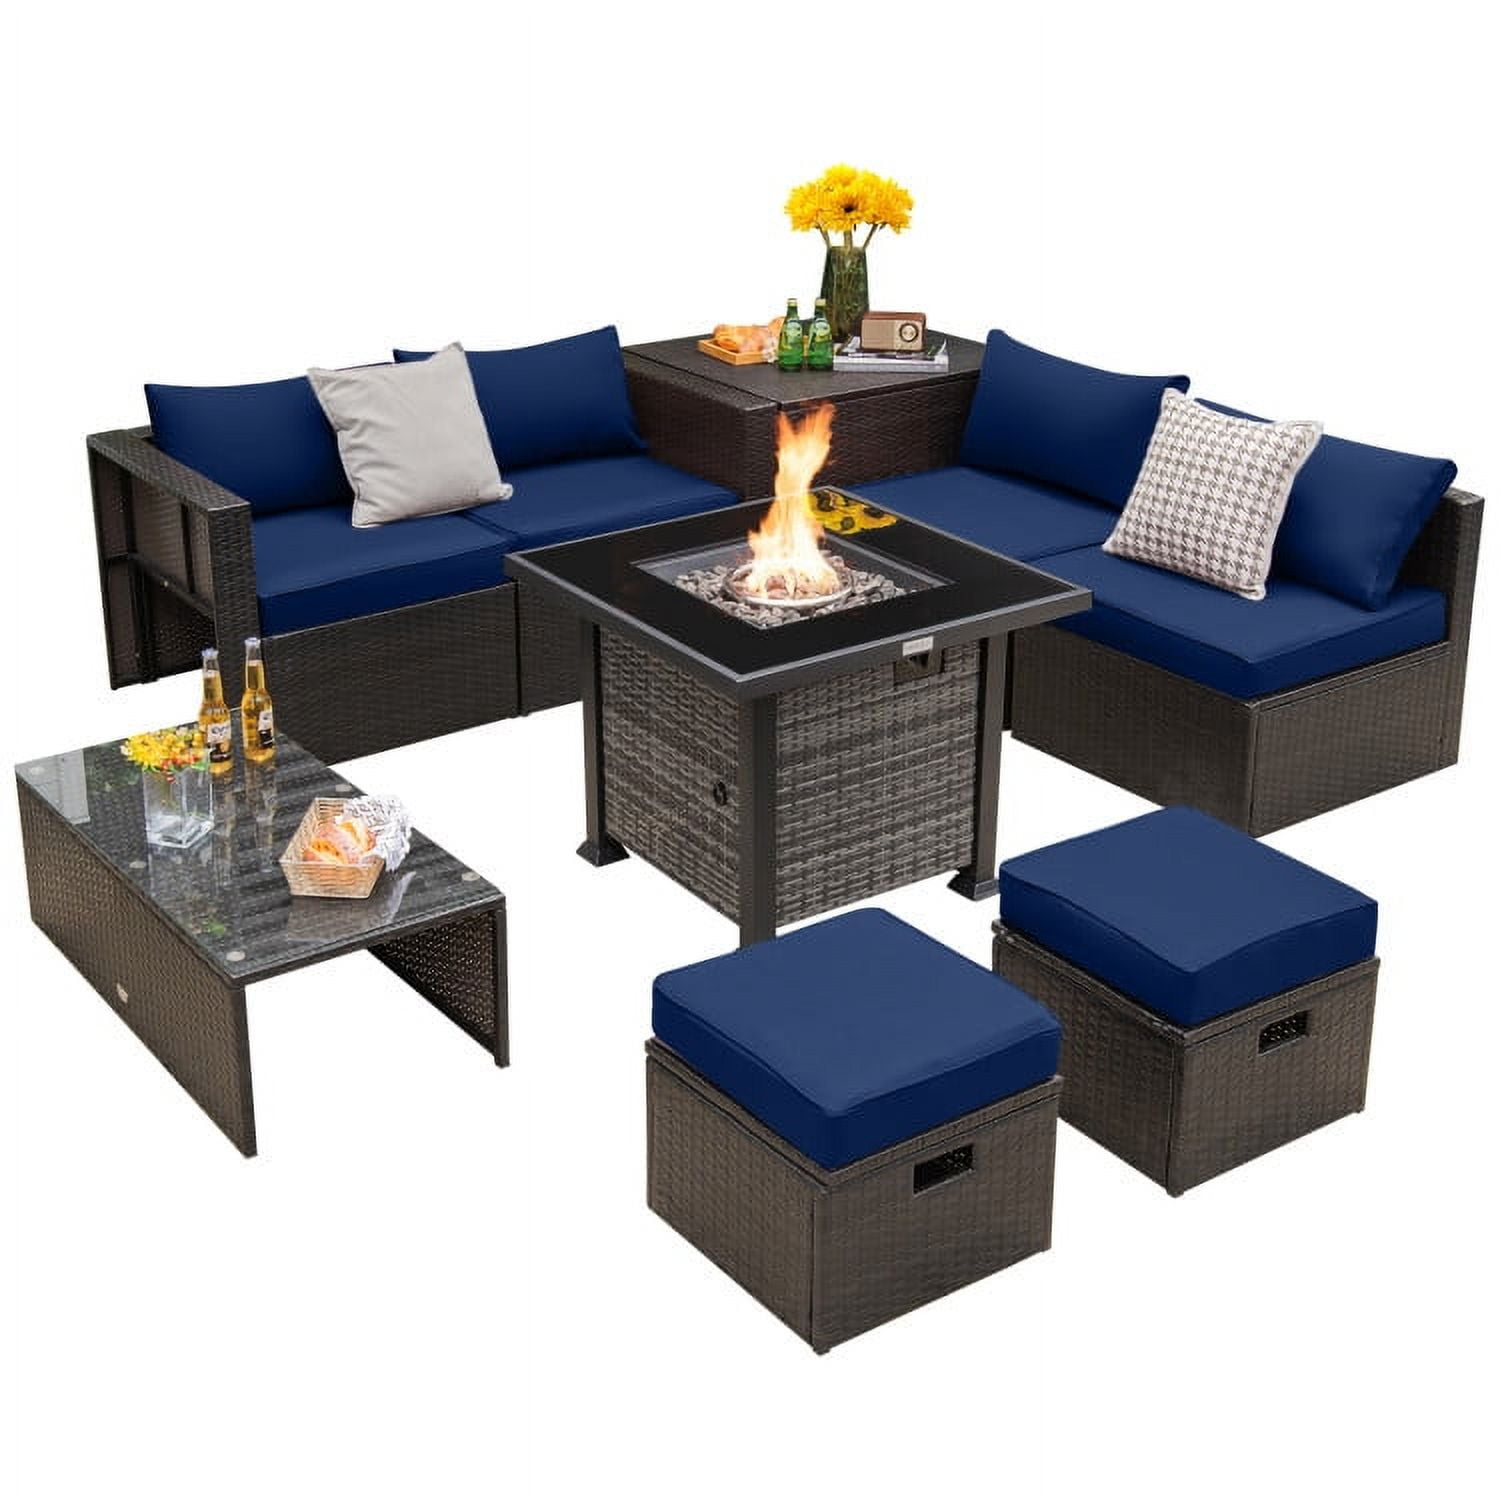 Aimee Lii Outdoor 9 Pieces Patio Furniture Set with Propane Fire Pit Table, Patio Furniture Sets, Navy